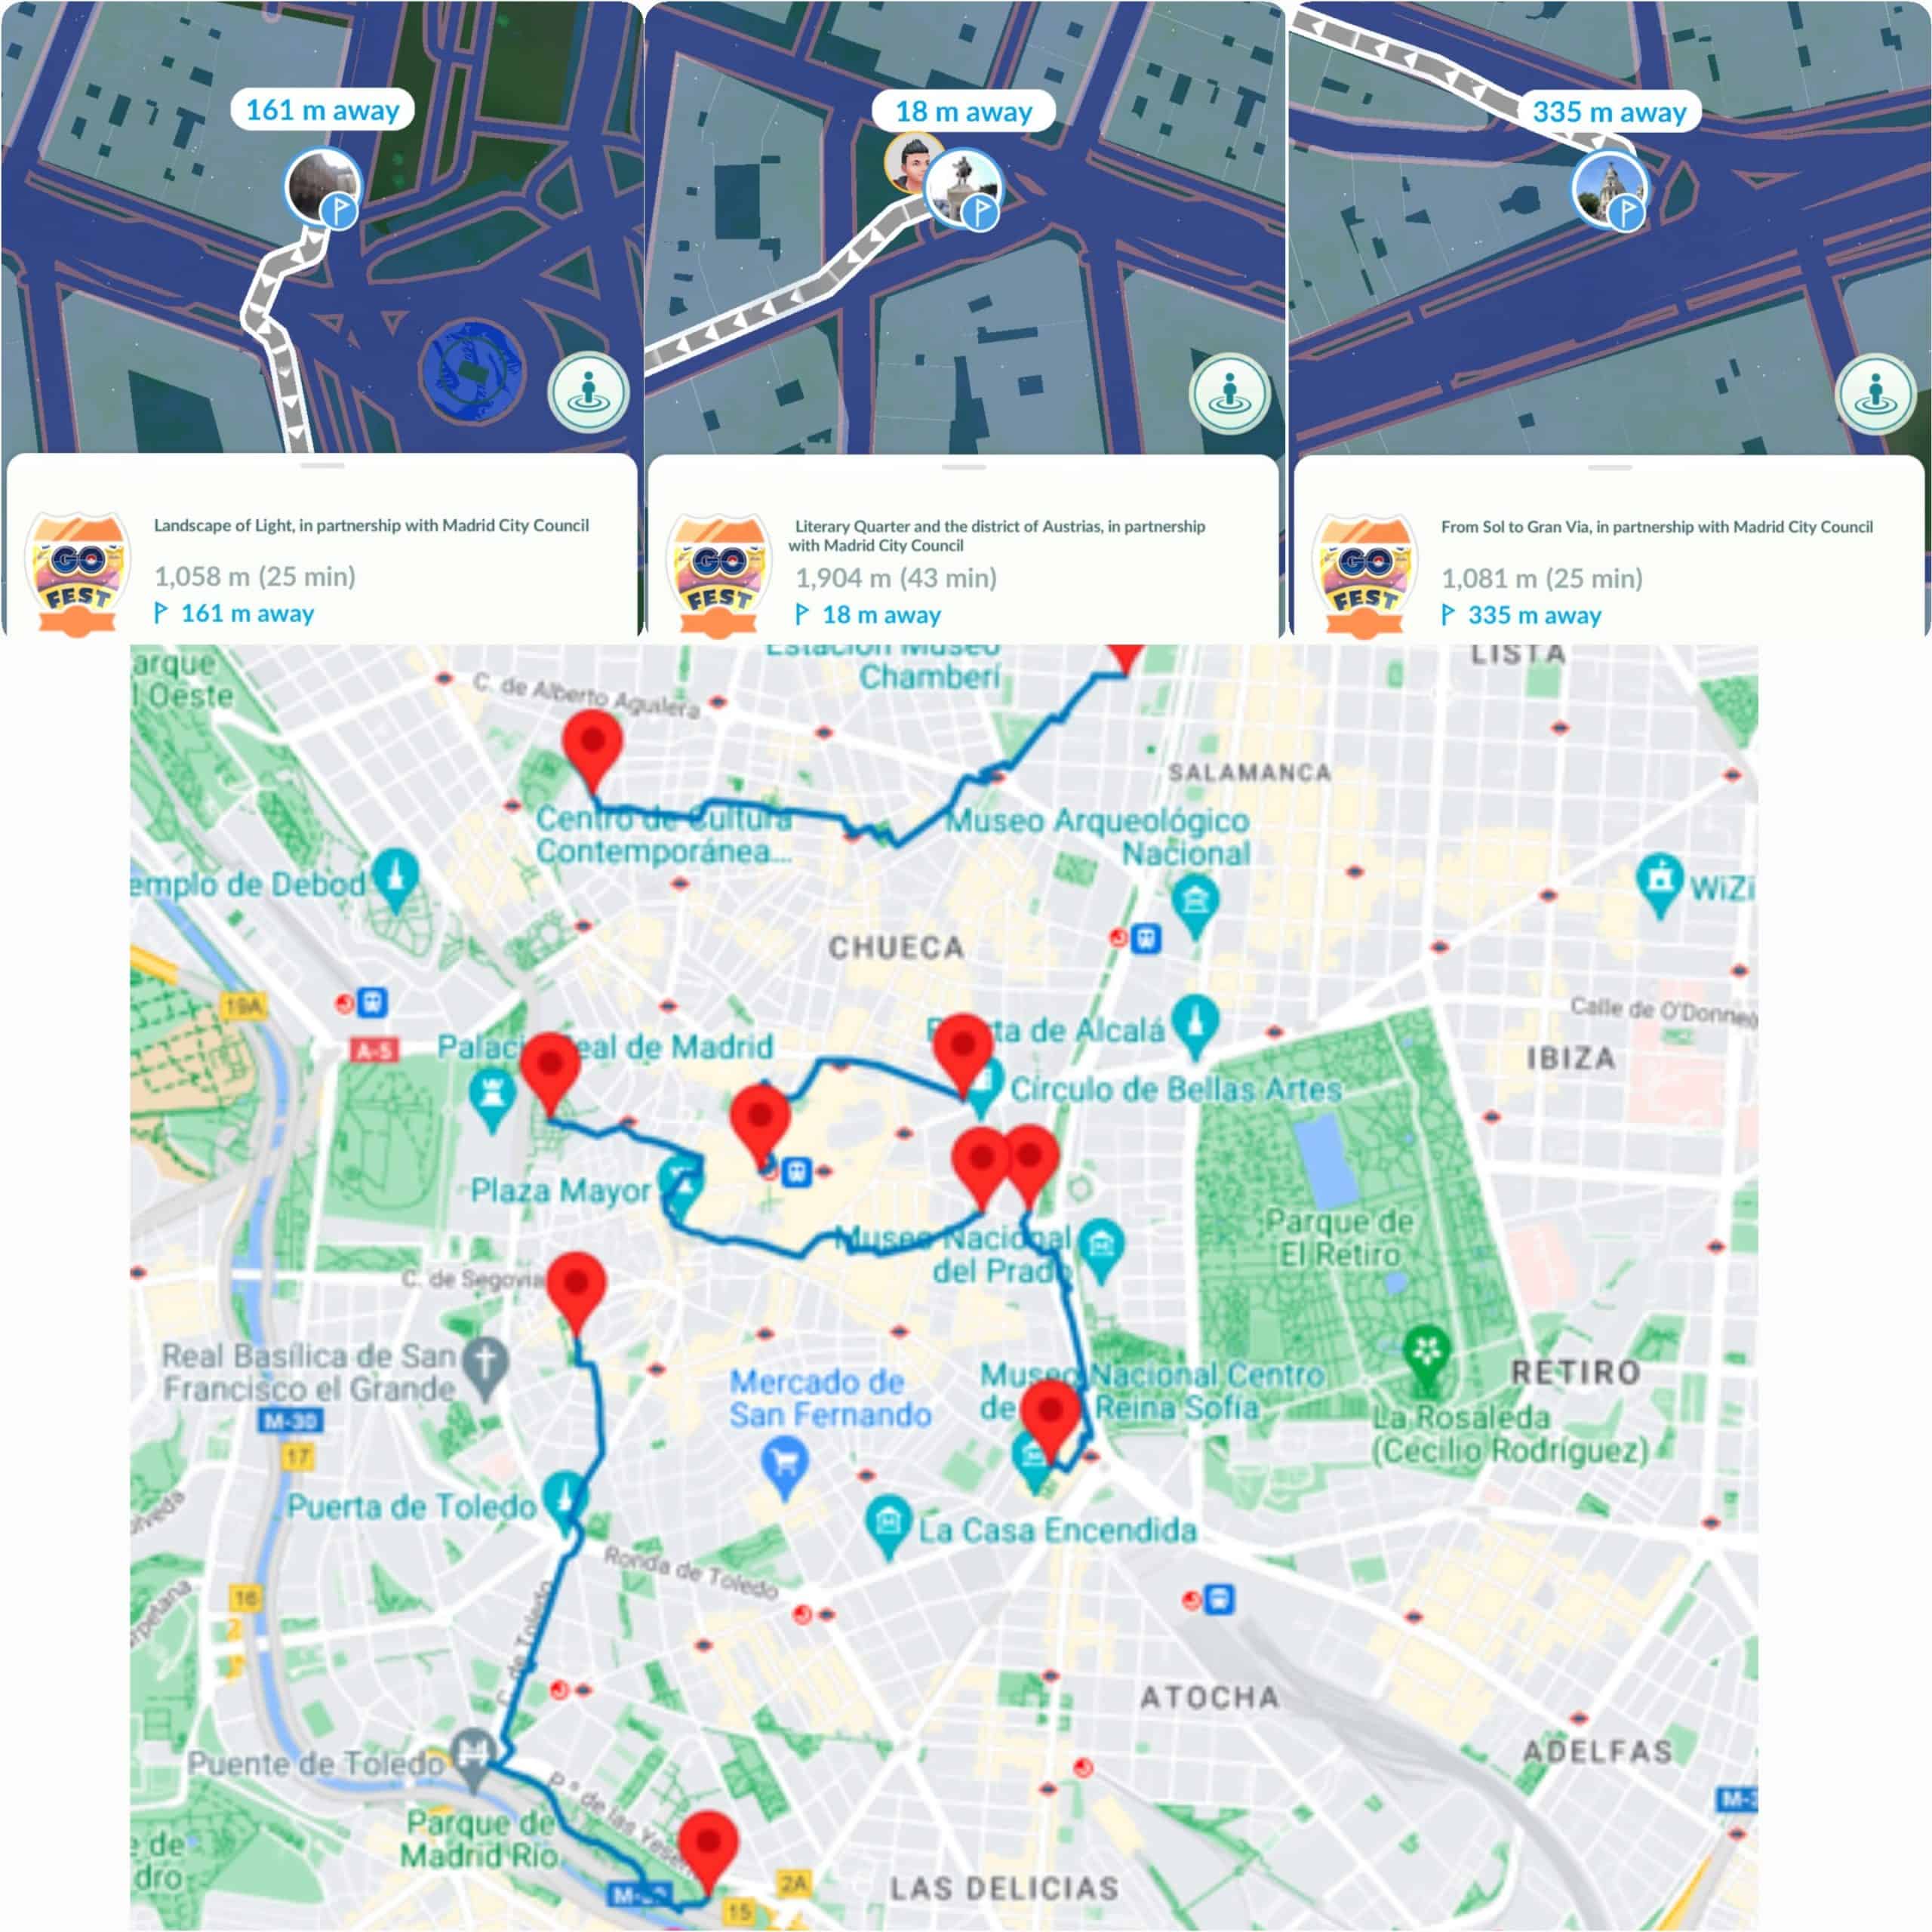 Official routes created by Niantic. Source: Pokexperto